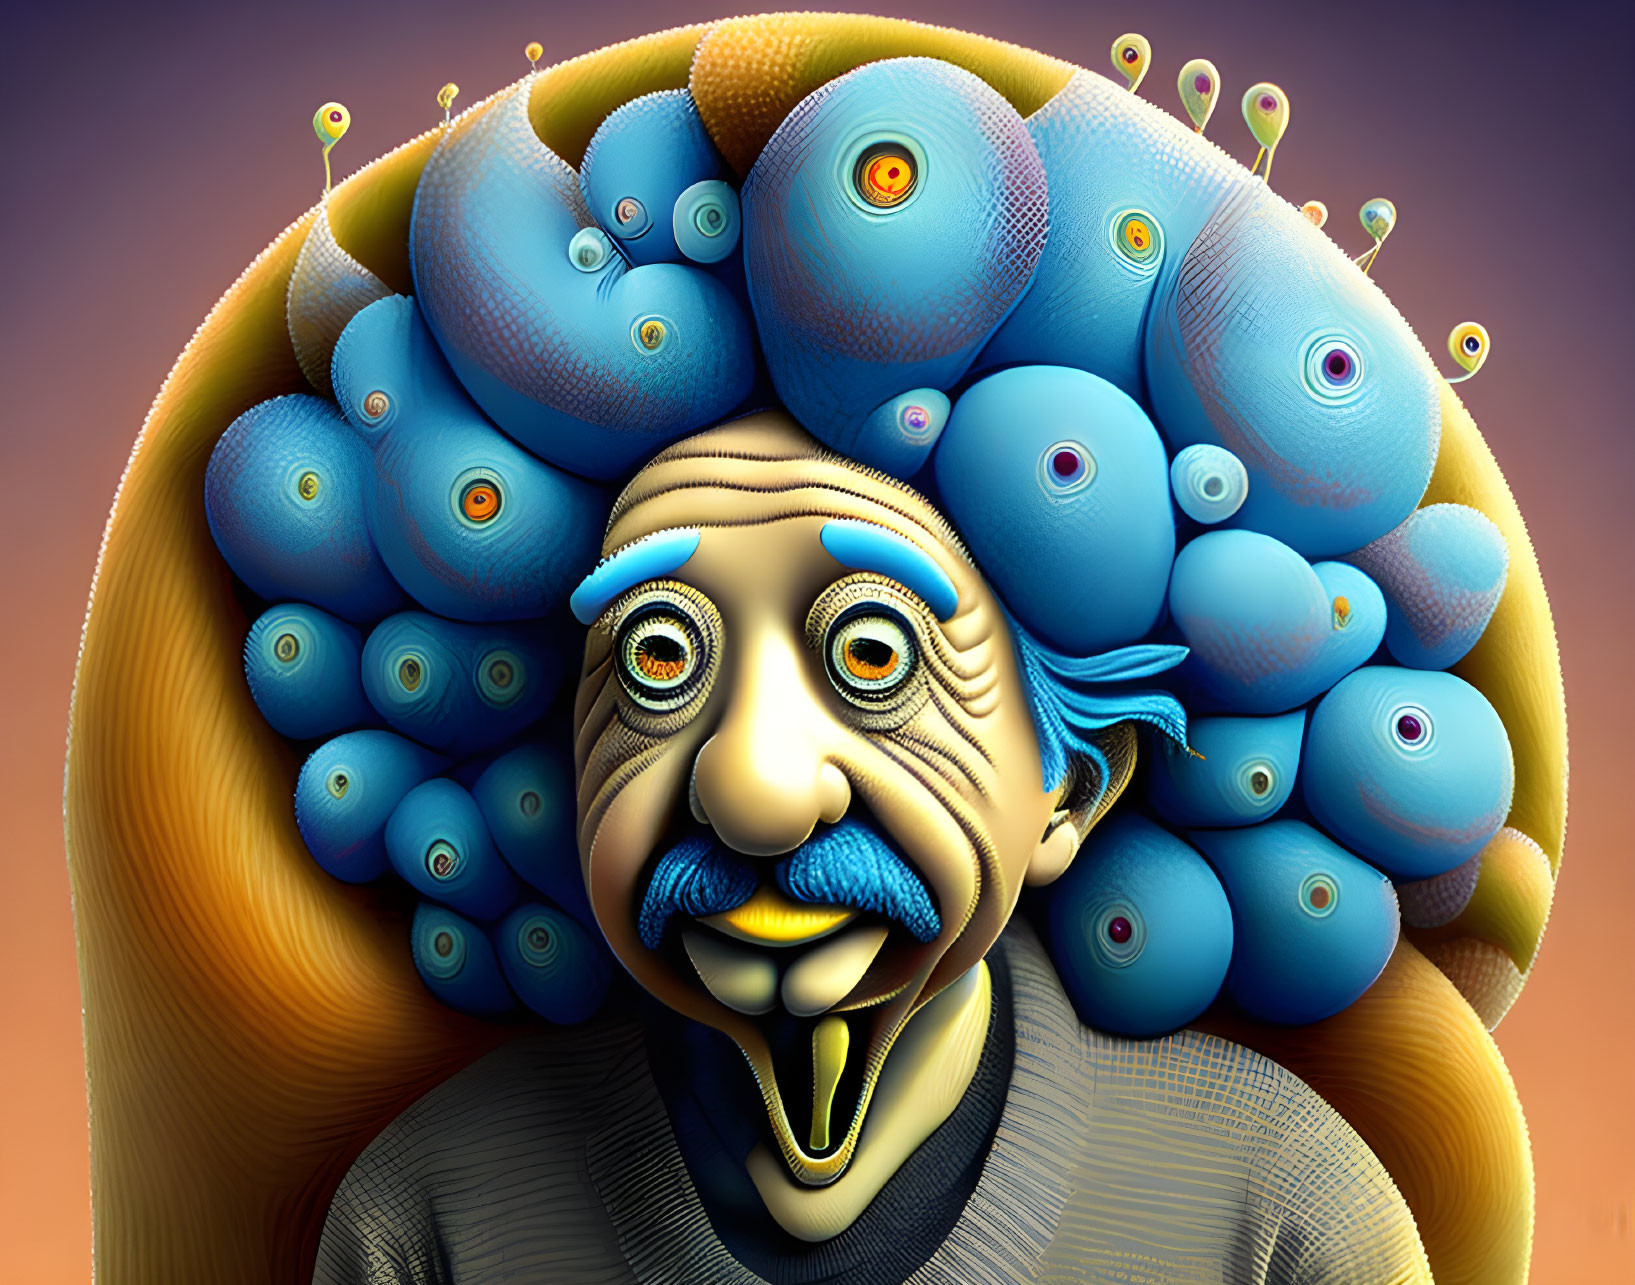 Colorful surreal portrait: Man with multiple eyes on head and tongue eye, orange backdrop